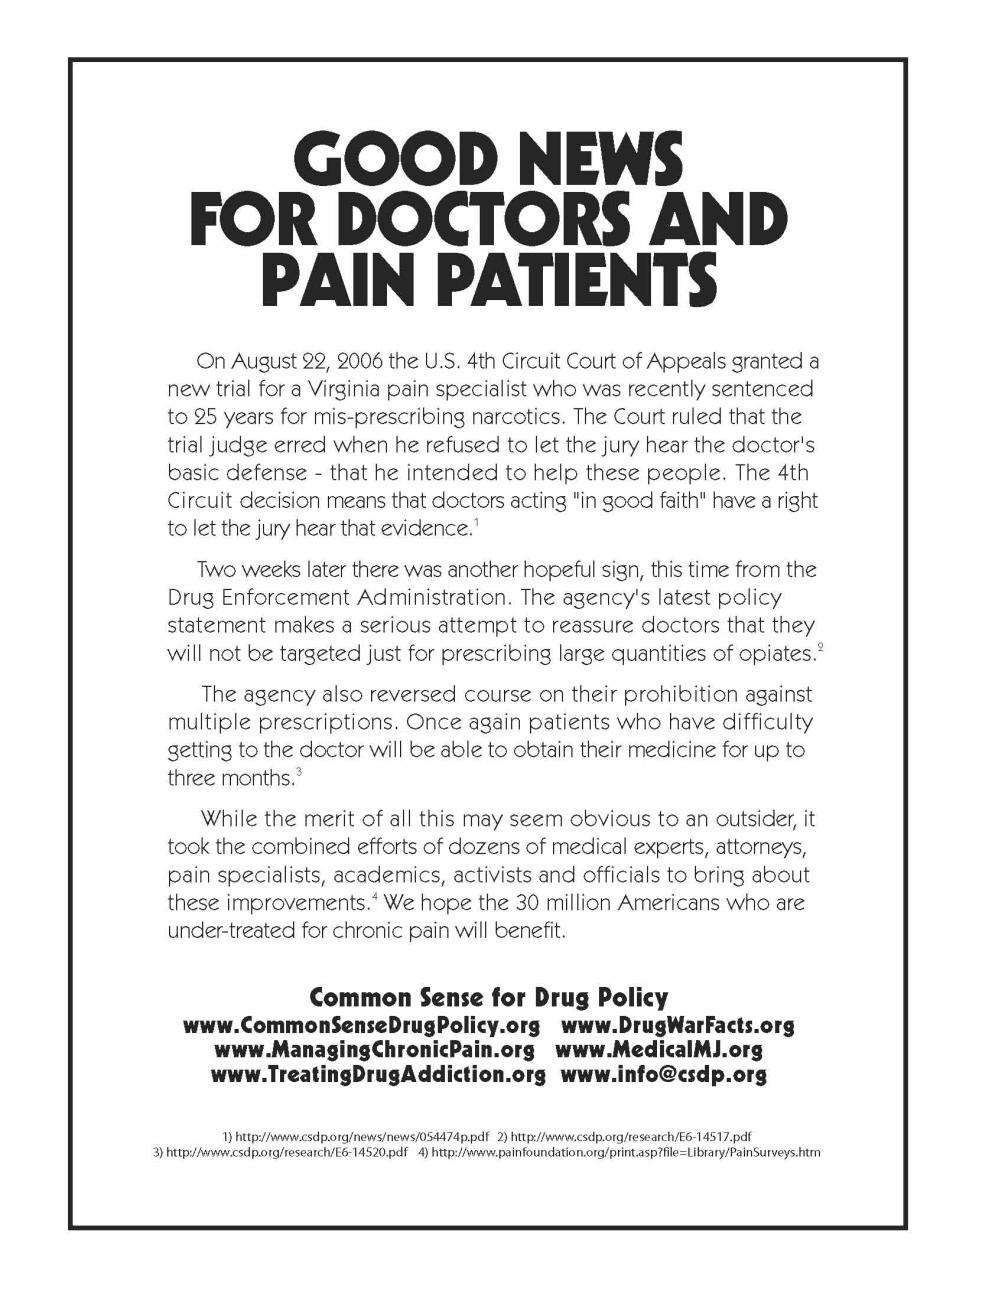 Good News for Doctors and Pain Patients